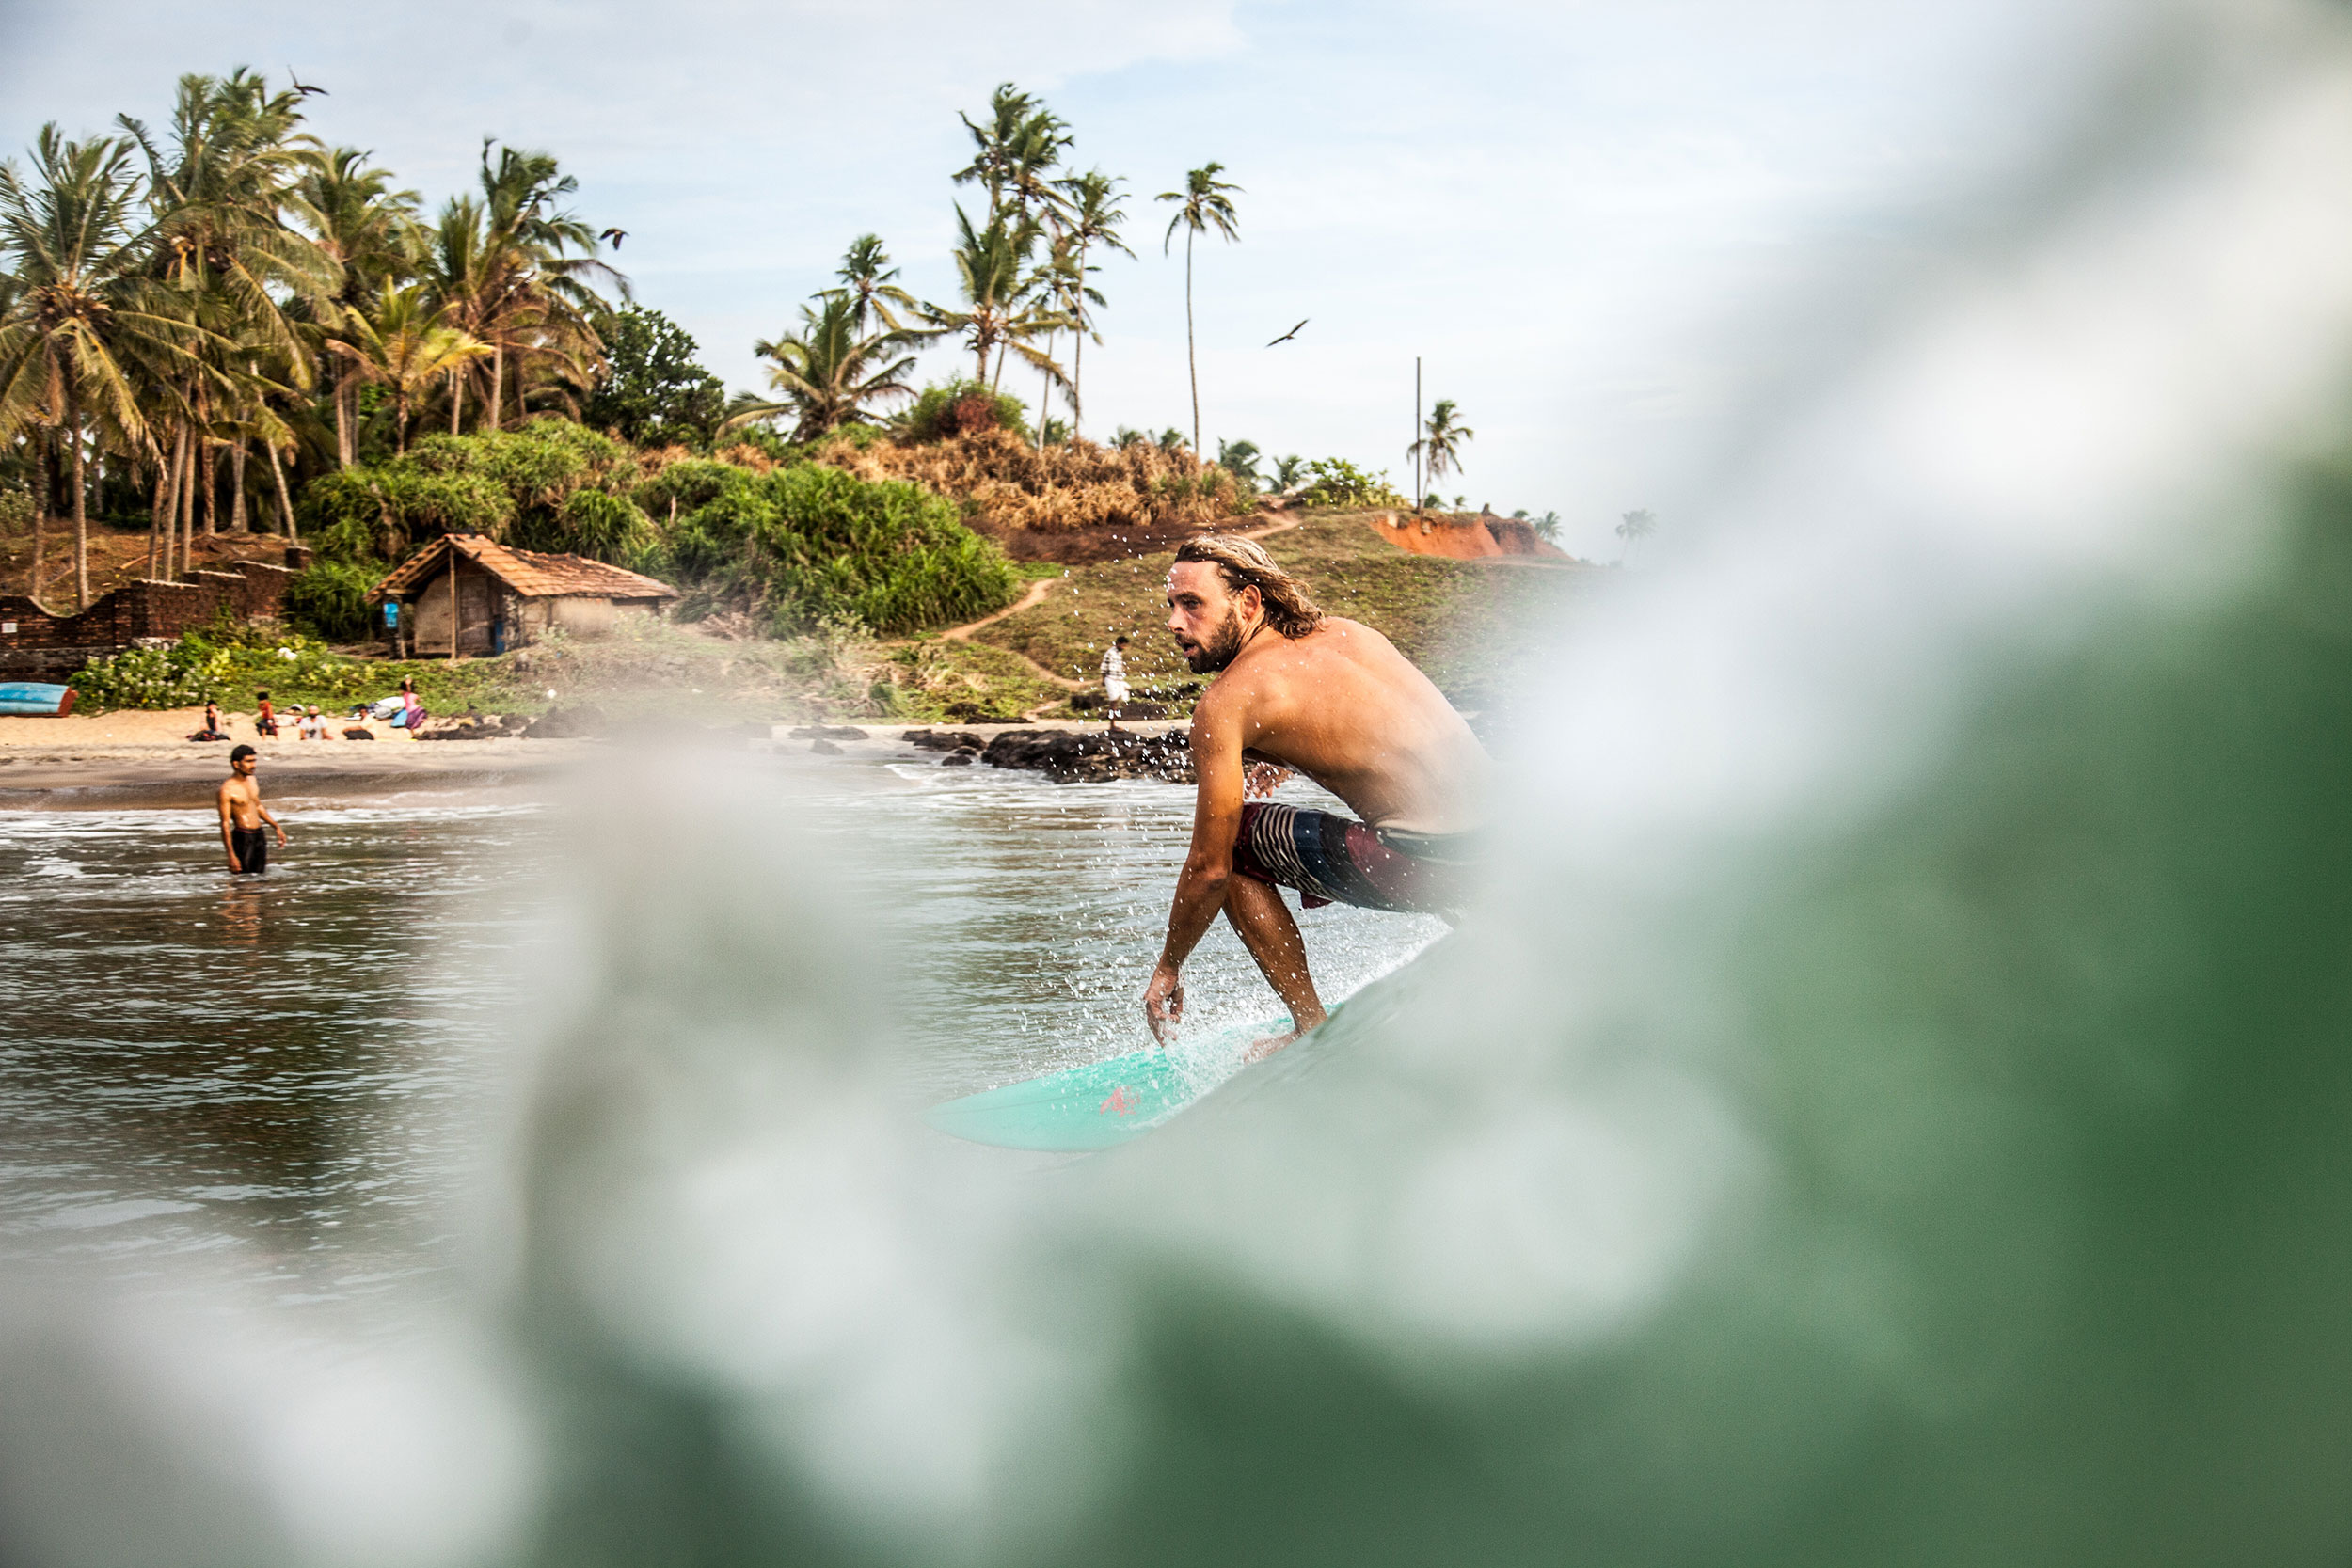 Joshua Stenning, from England is one of the founders of the Sunday Surf Club in Kerala, where young Indians are taught how to surf. PHOTO: Berta Tilmante